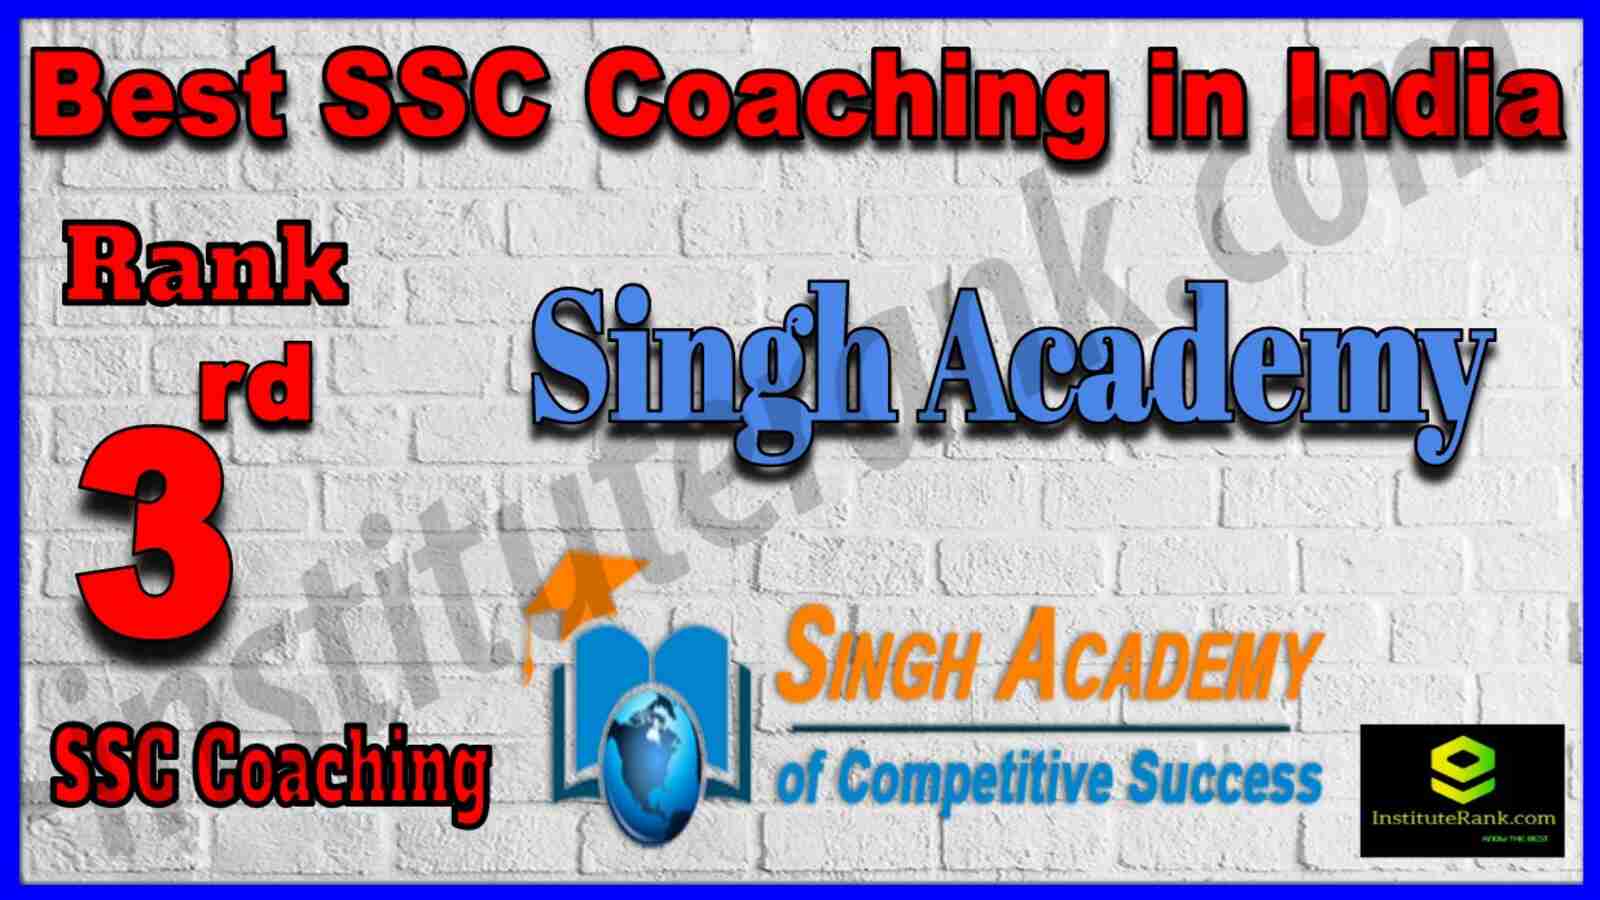 Rank 3 Best SSC Coaching in India